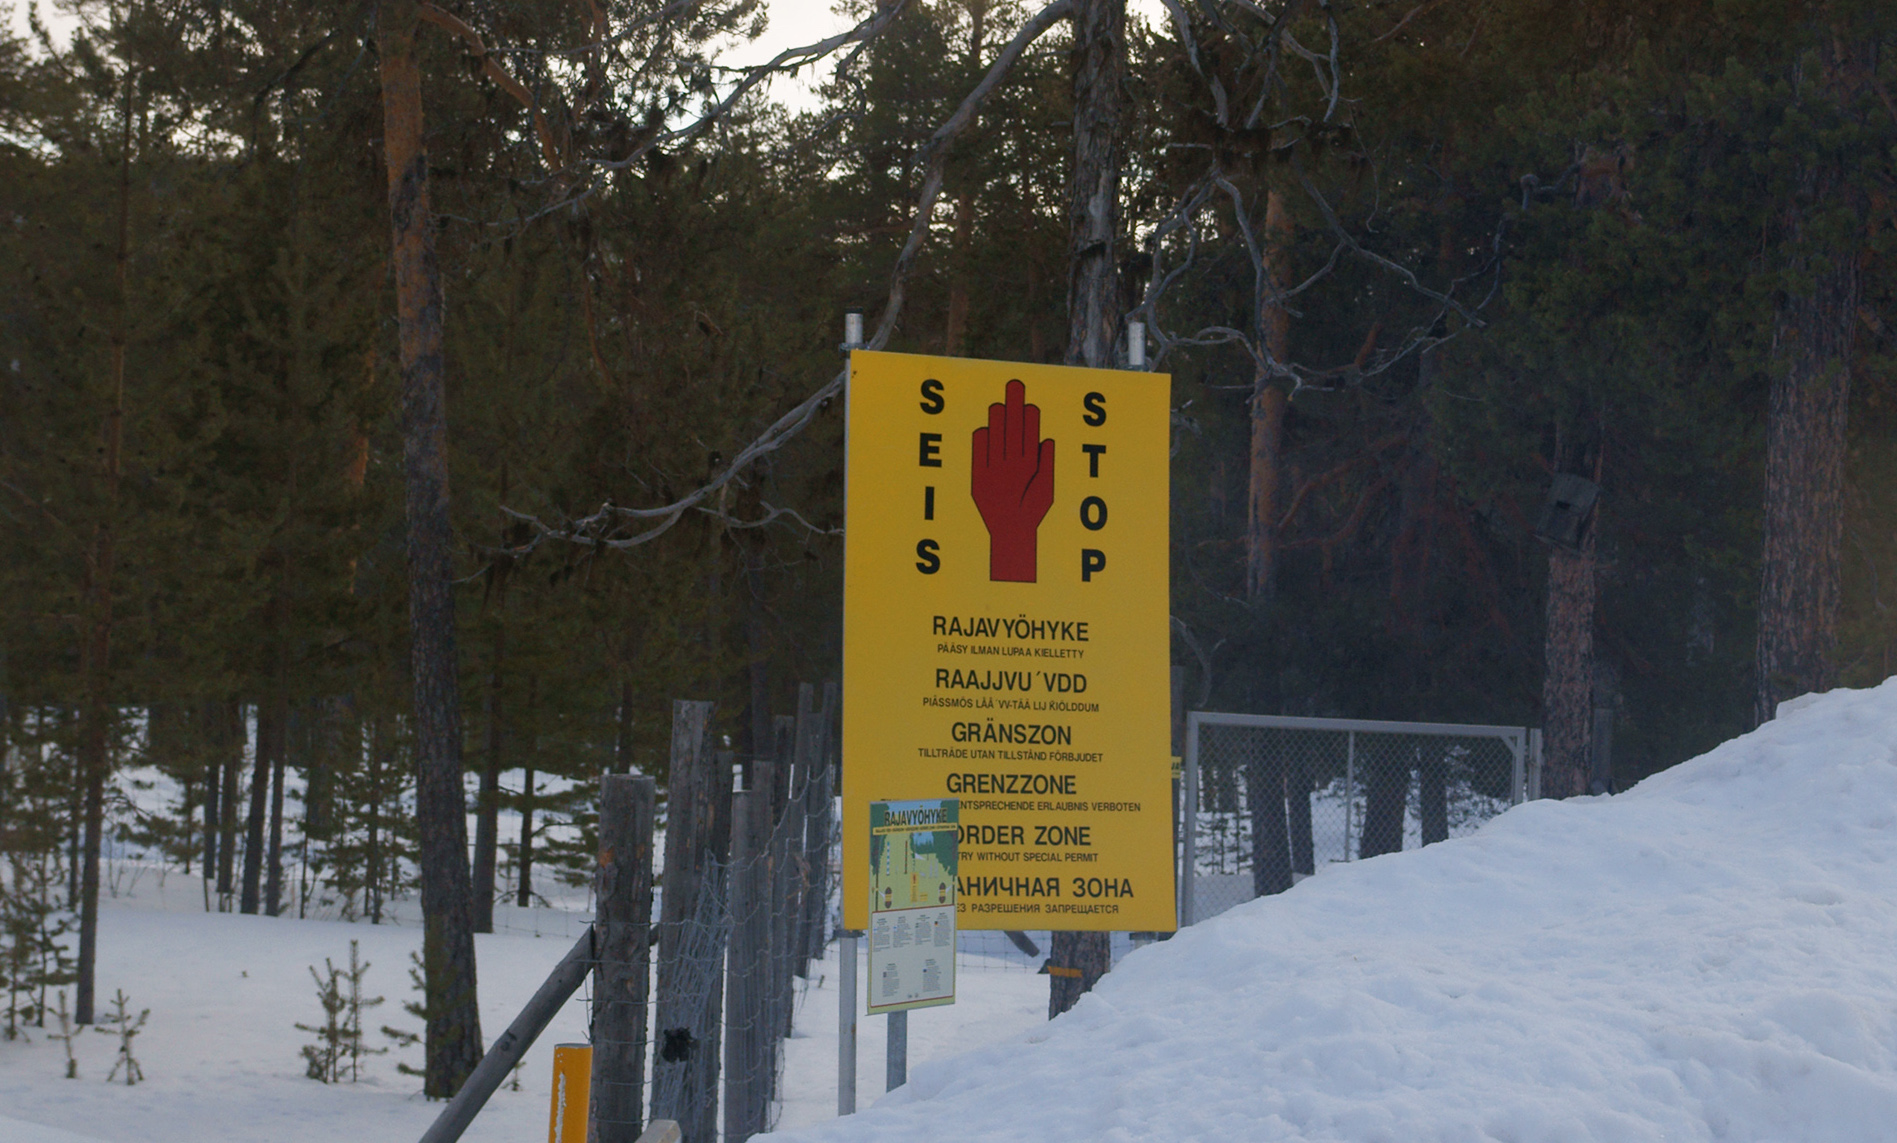 Finland extends closure of crossing stations on Russian border until further notice